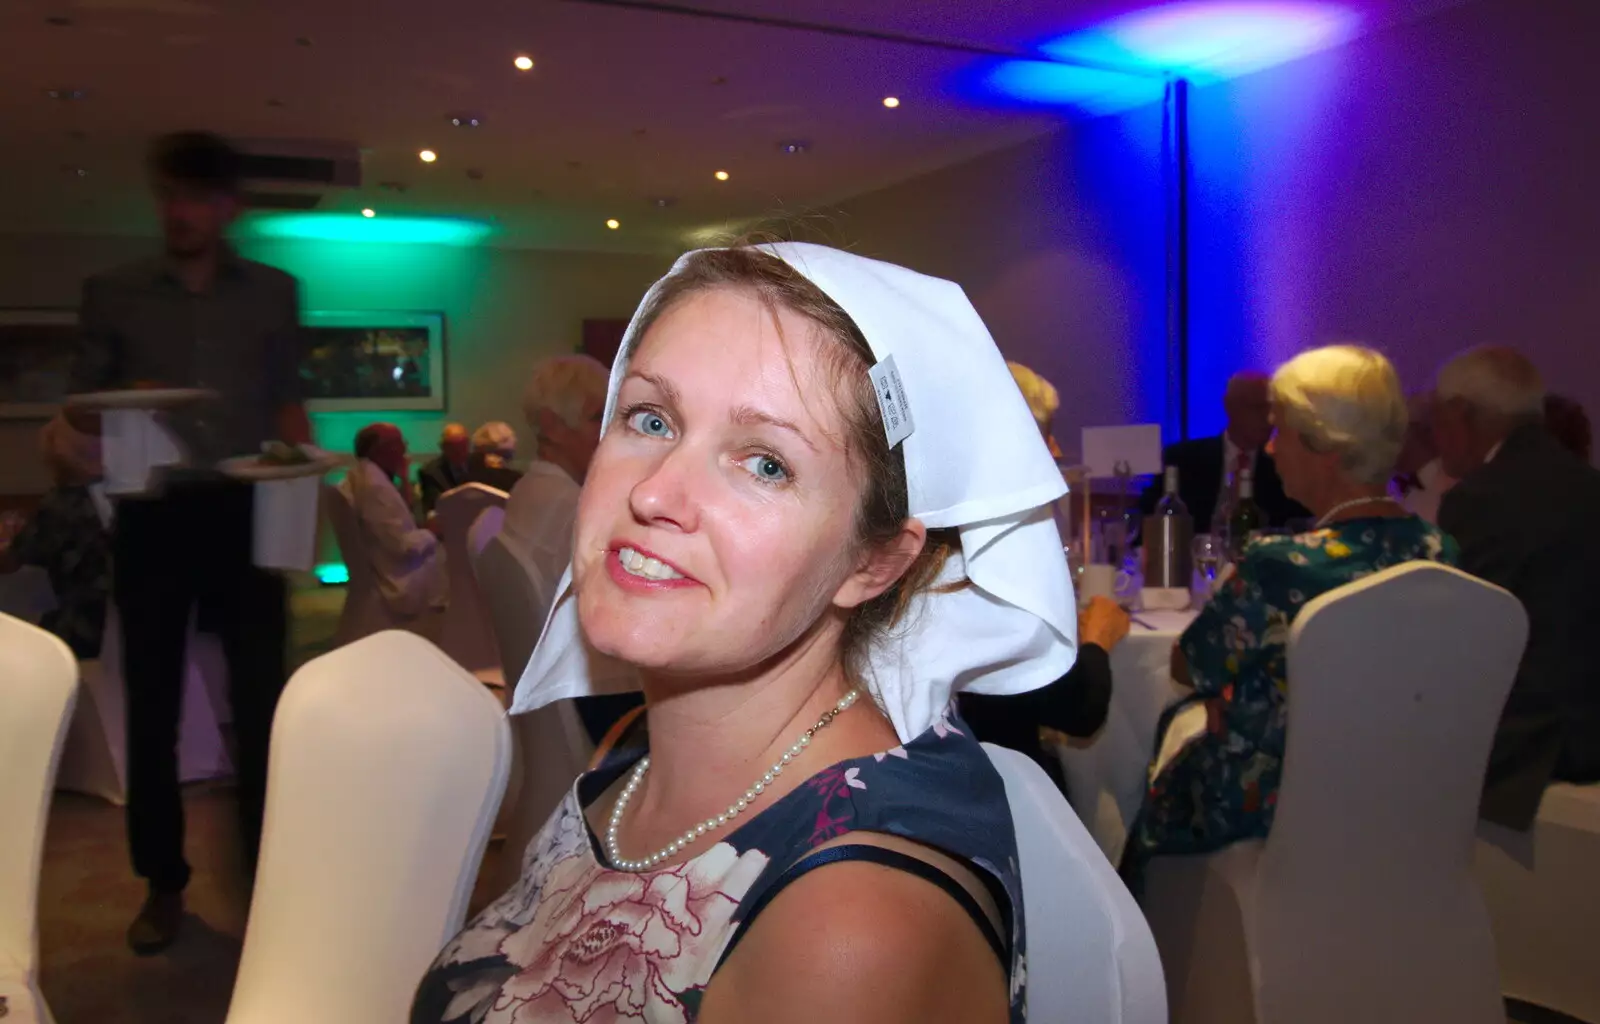 Isobel does some sort of Mother Theresa impression, from Kenilworth Castle and the 69th Entry Reunion Dinner, Stratford, Warwickshire - 14th September 2019